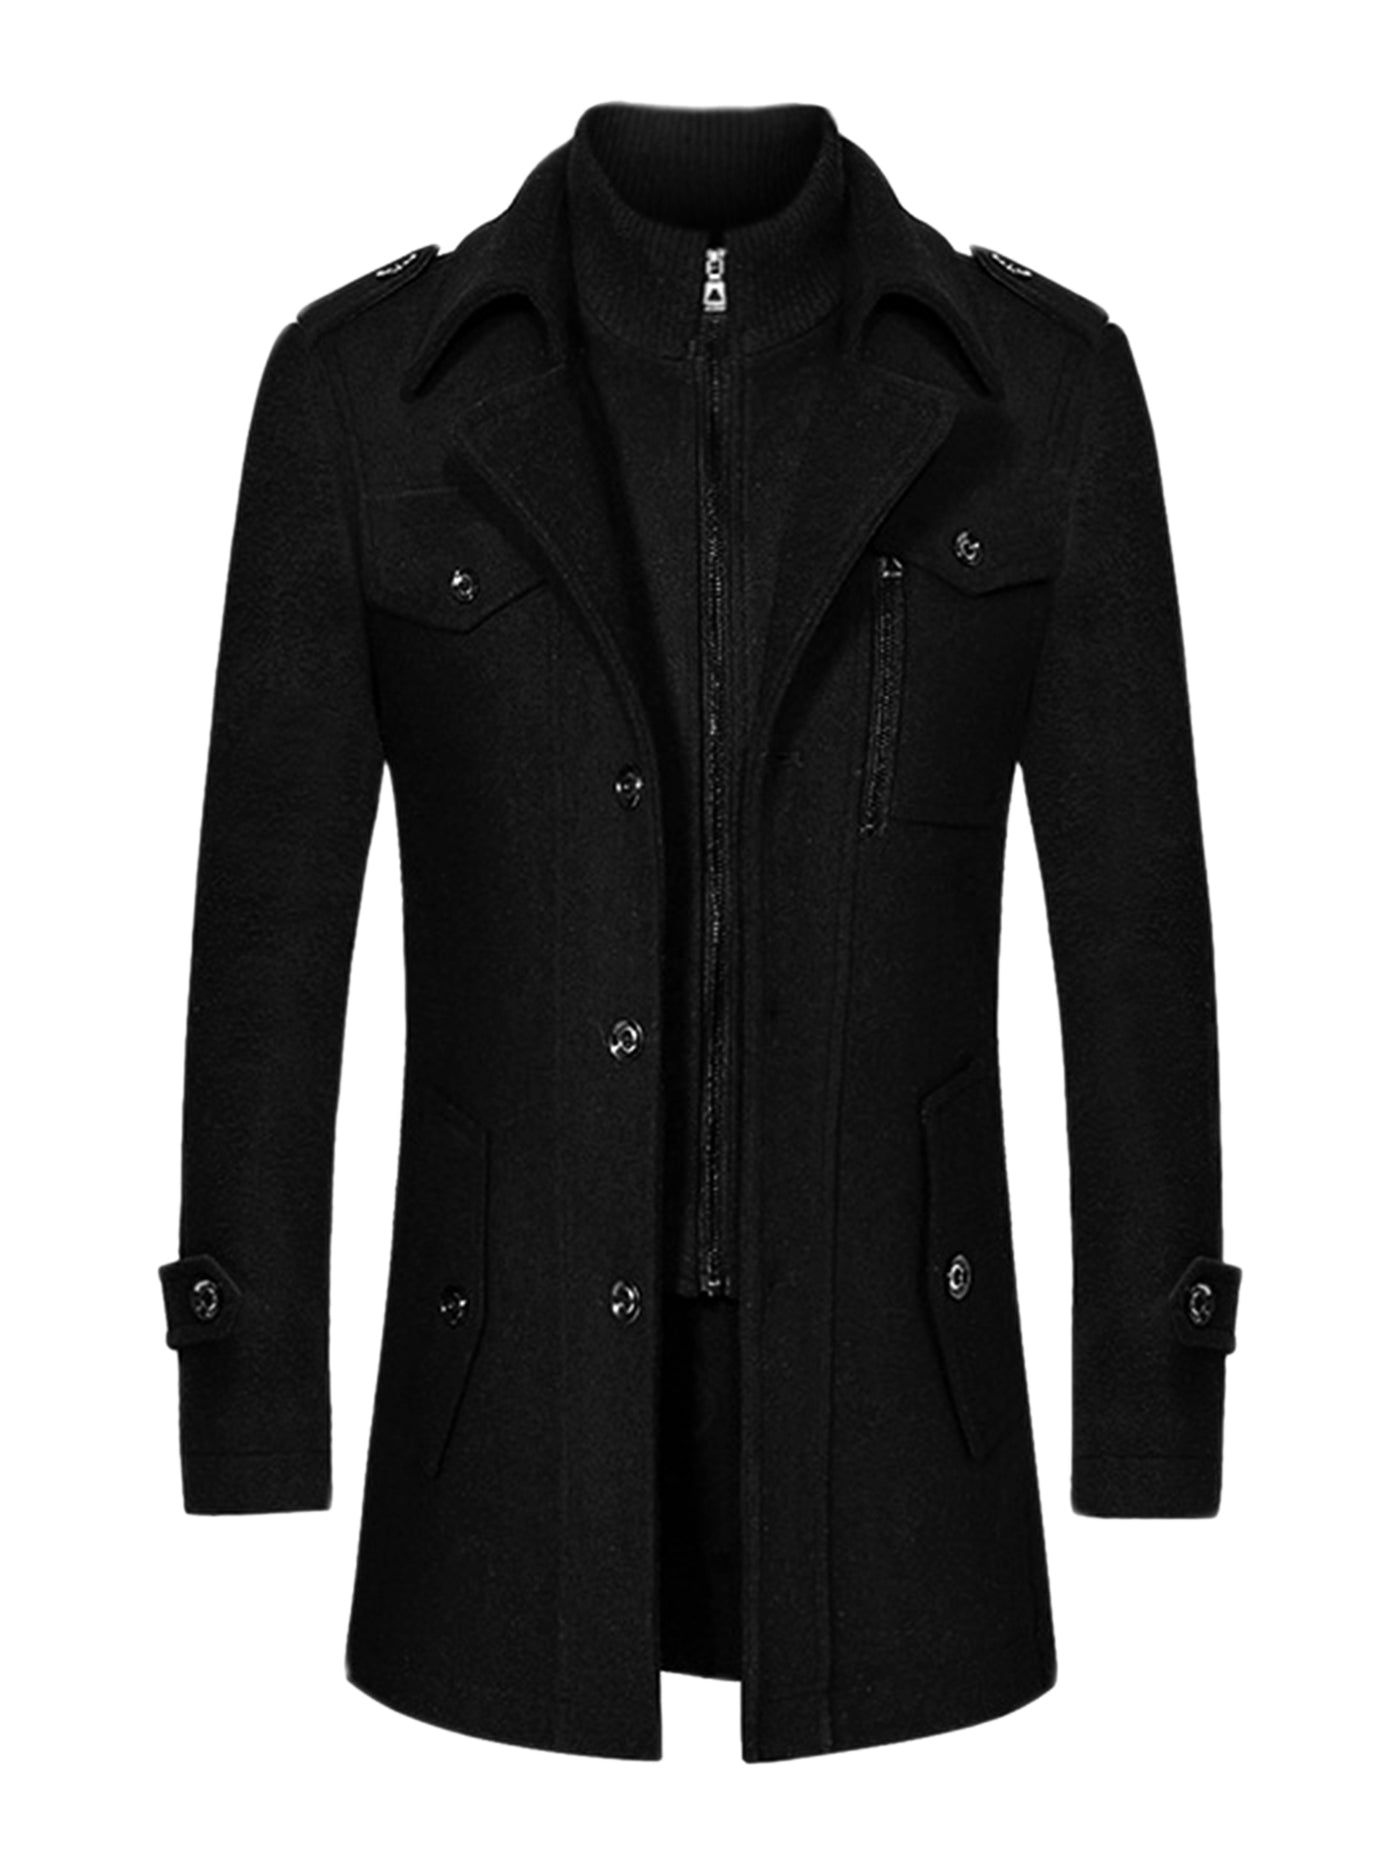 Bublédon Men's Winter Trench Coat Single Breasted Layered Detachable Lining Pea Coats